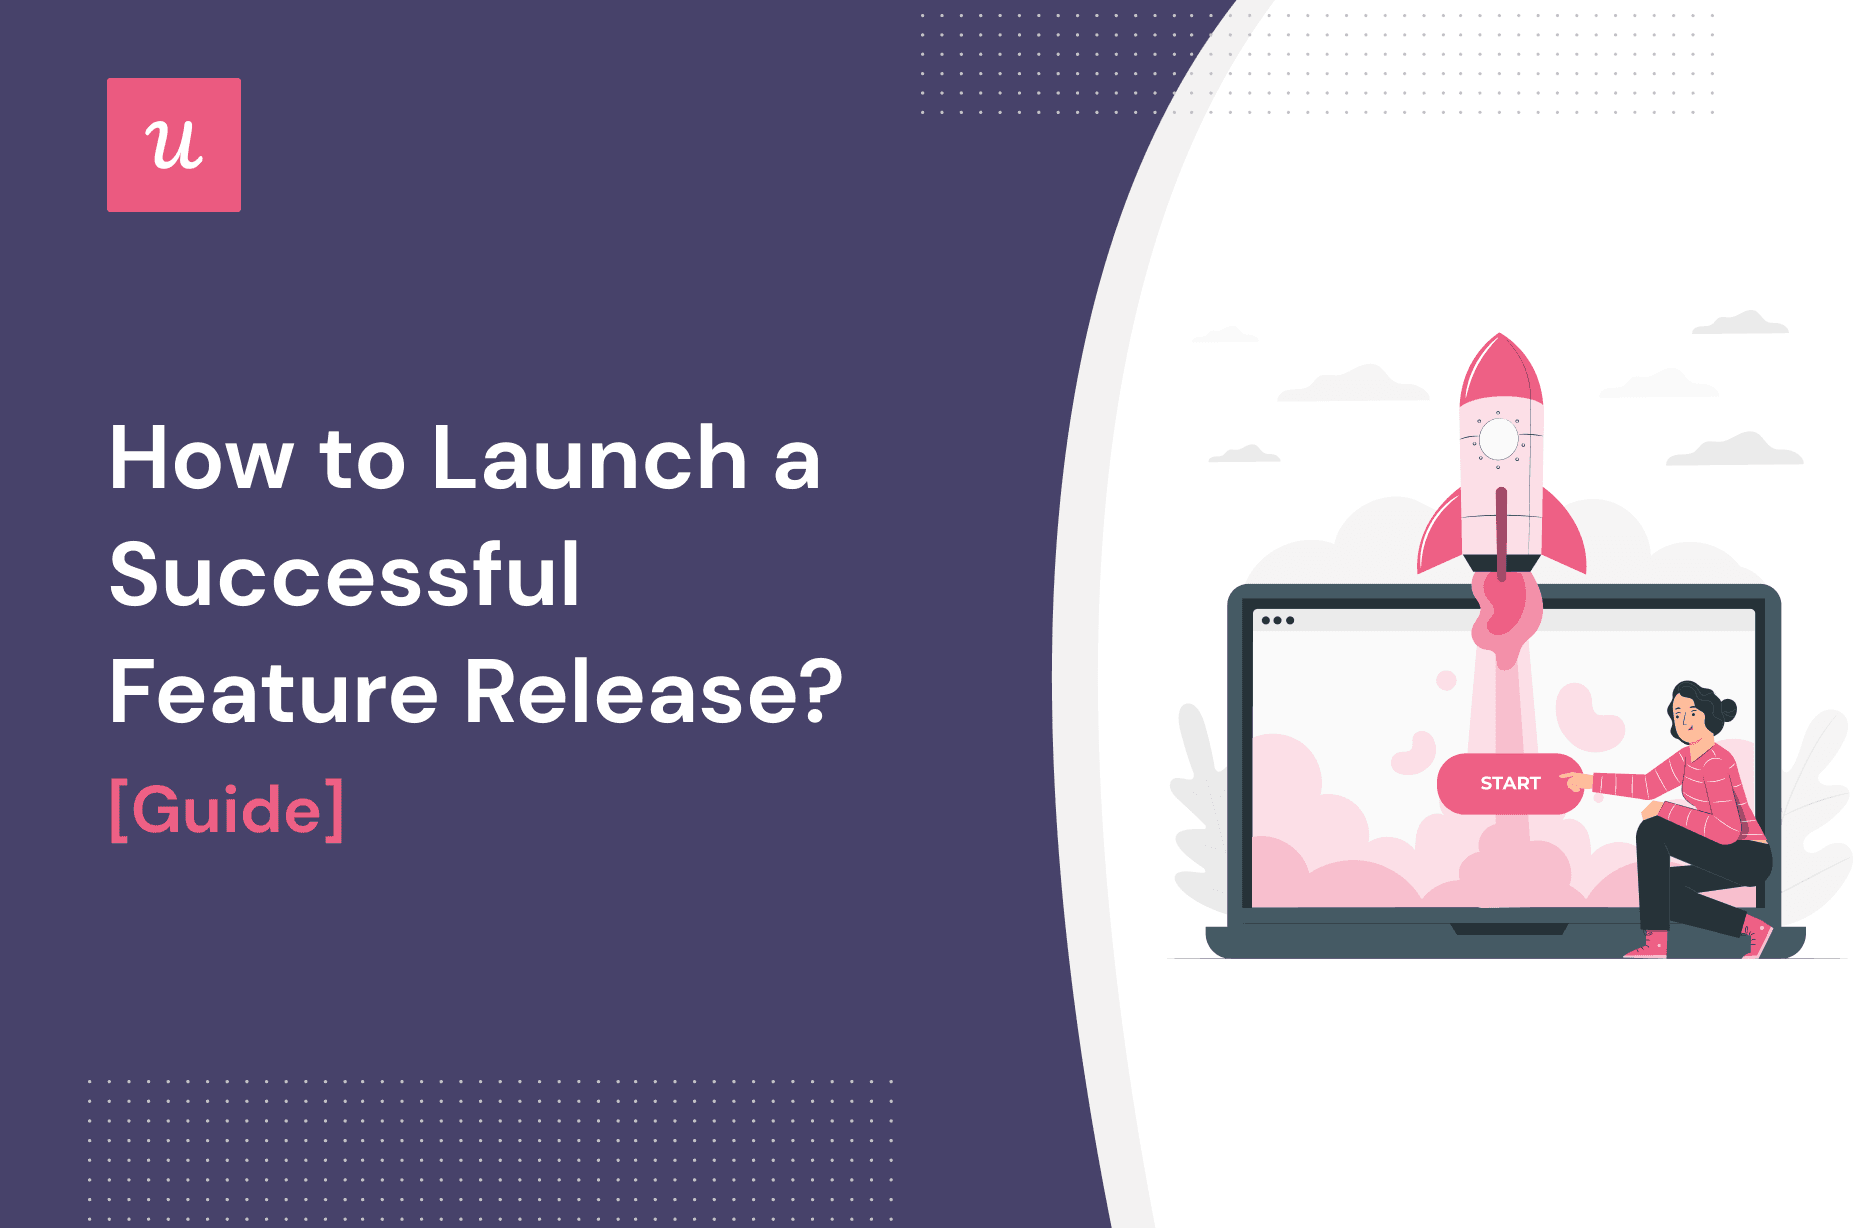 How to Launch a Successful Feature Release? A Guide cover